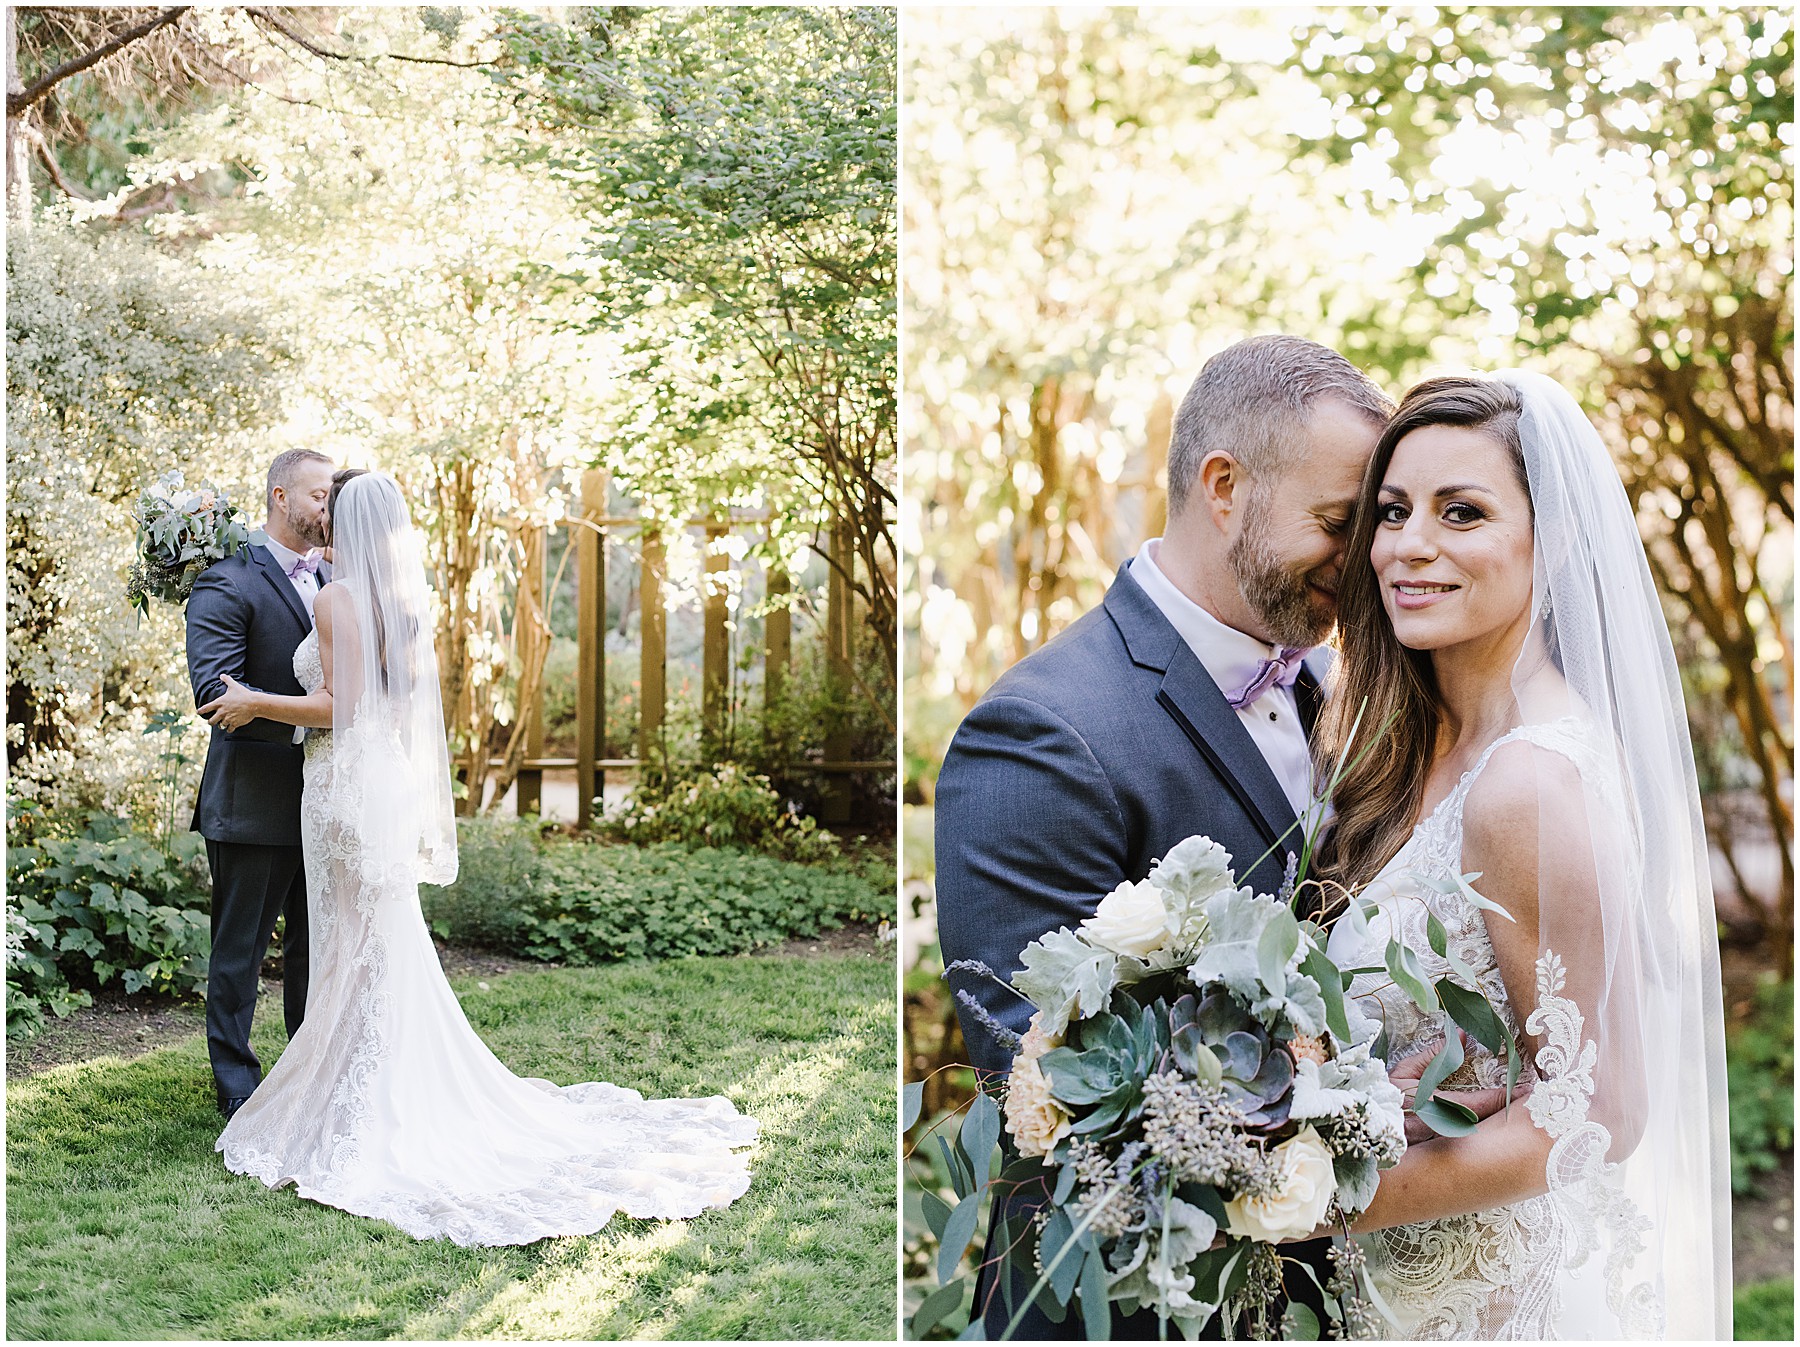 Cambria Pines Lodge Summer Wedding with Lavender, Greys, and Succulents